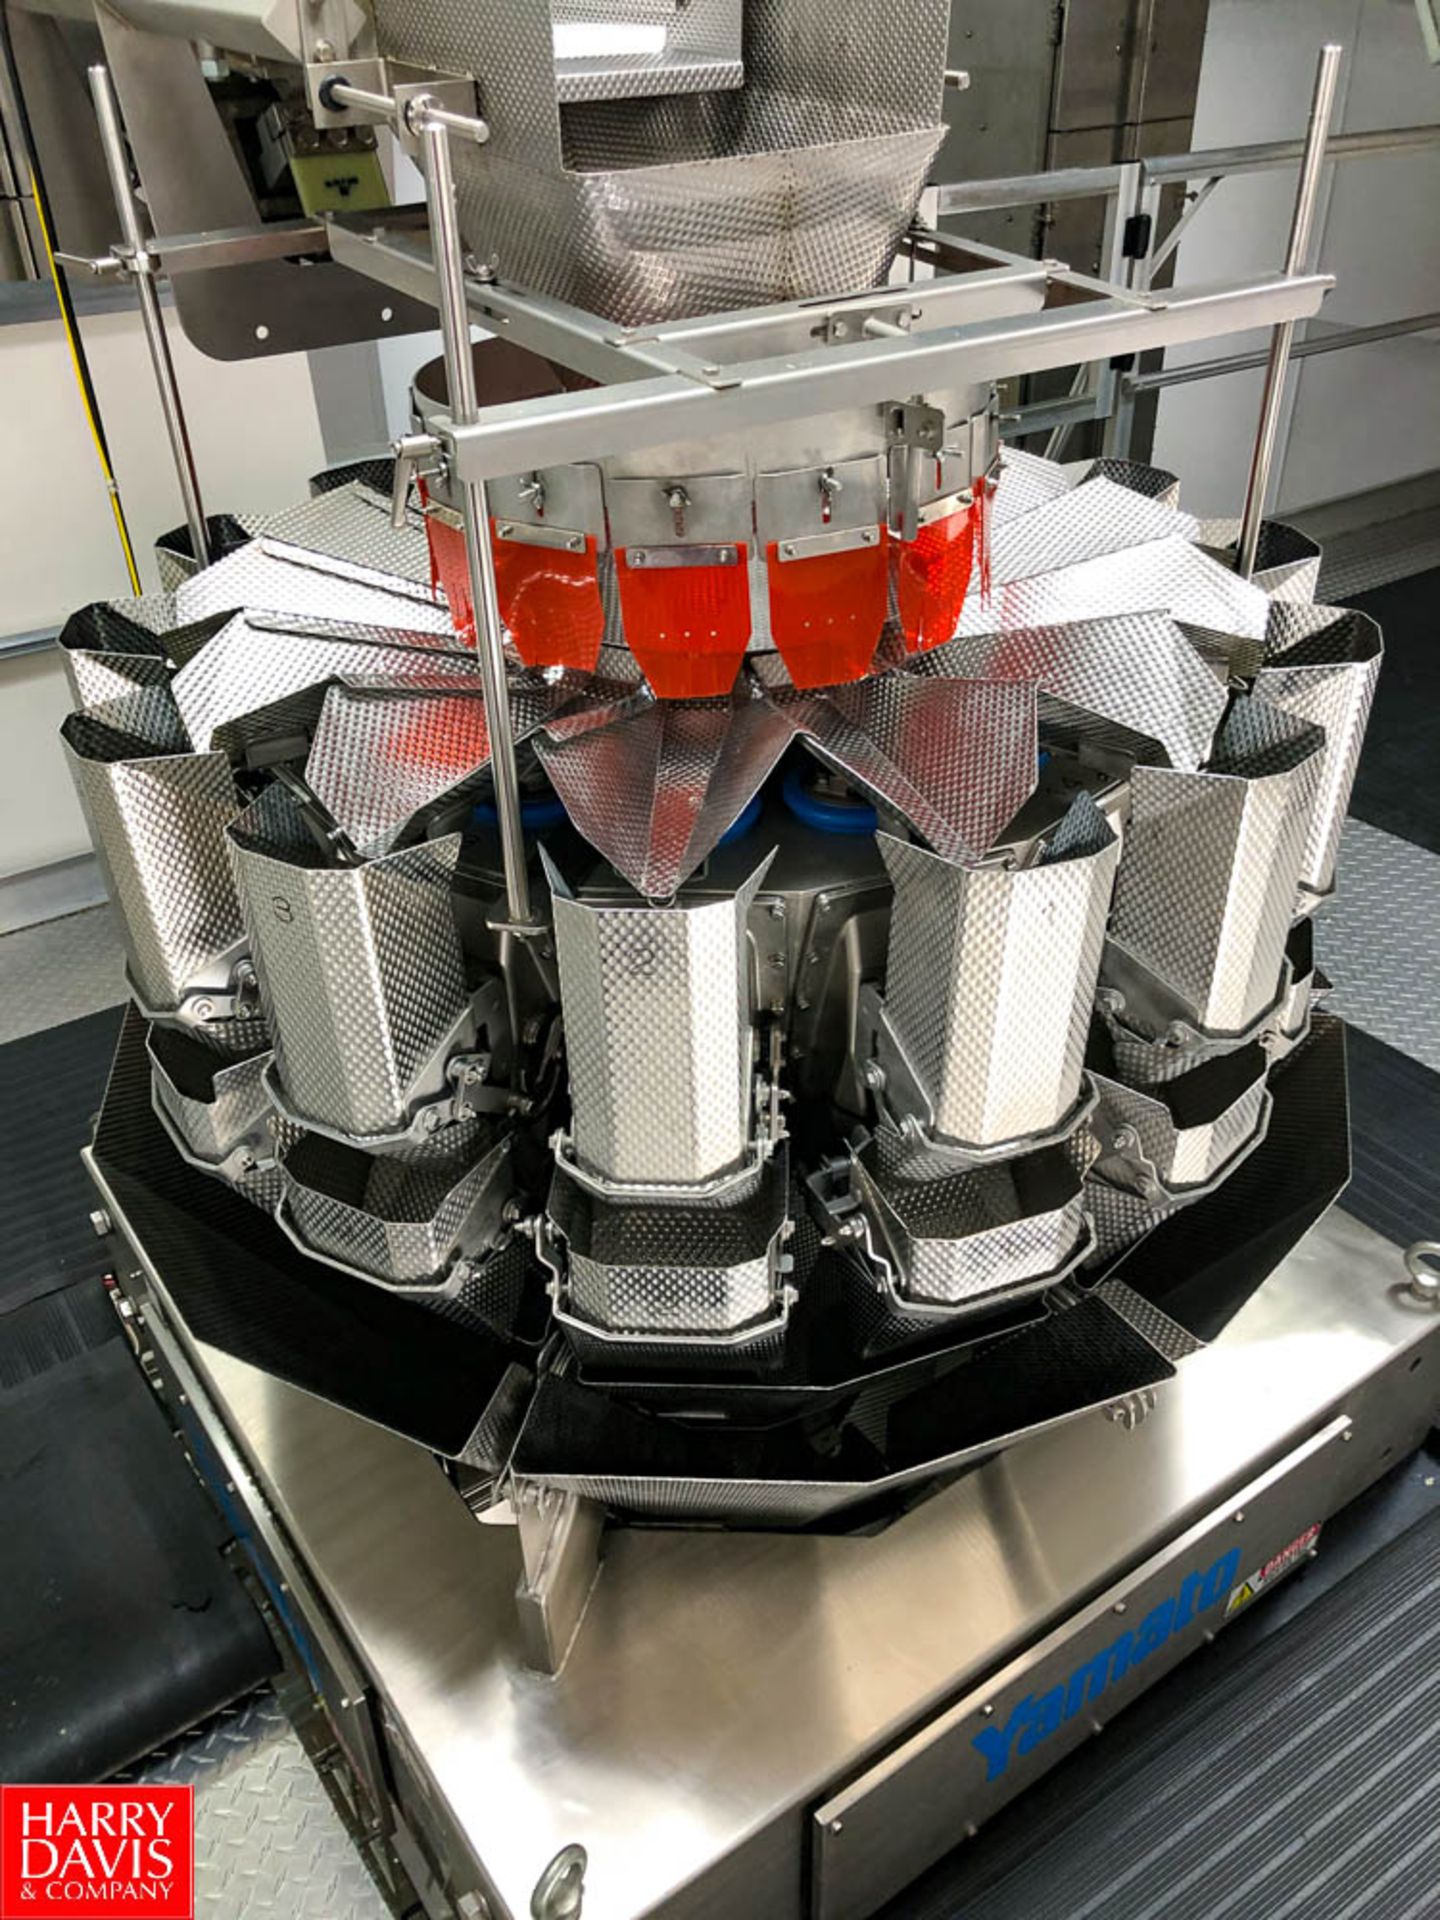 2019 Yamato Dataweigh Multihead Weigher, Omega Series, Model: ADW-O-314F, Target Weight: 8-1000 - Image 4 of 4